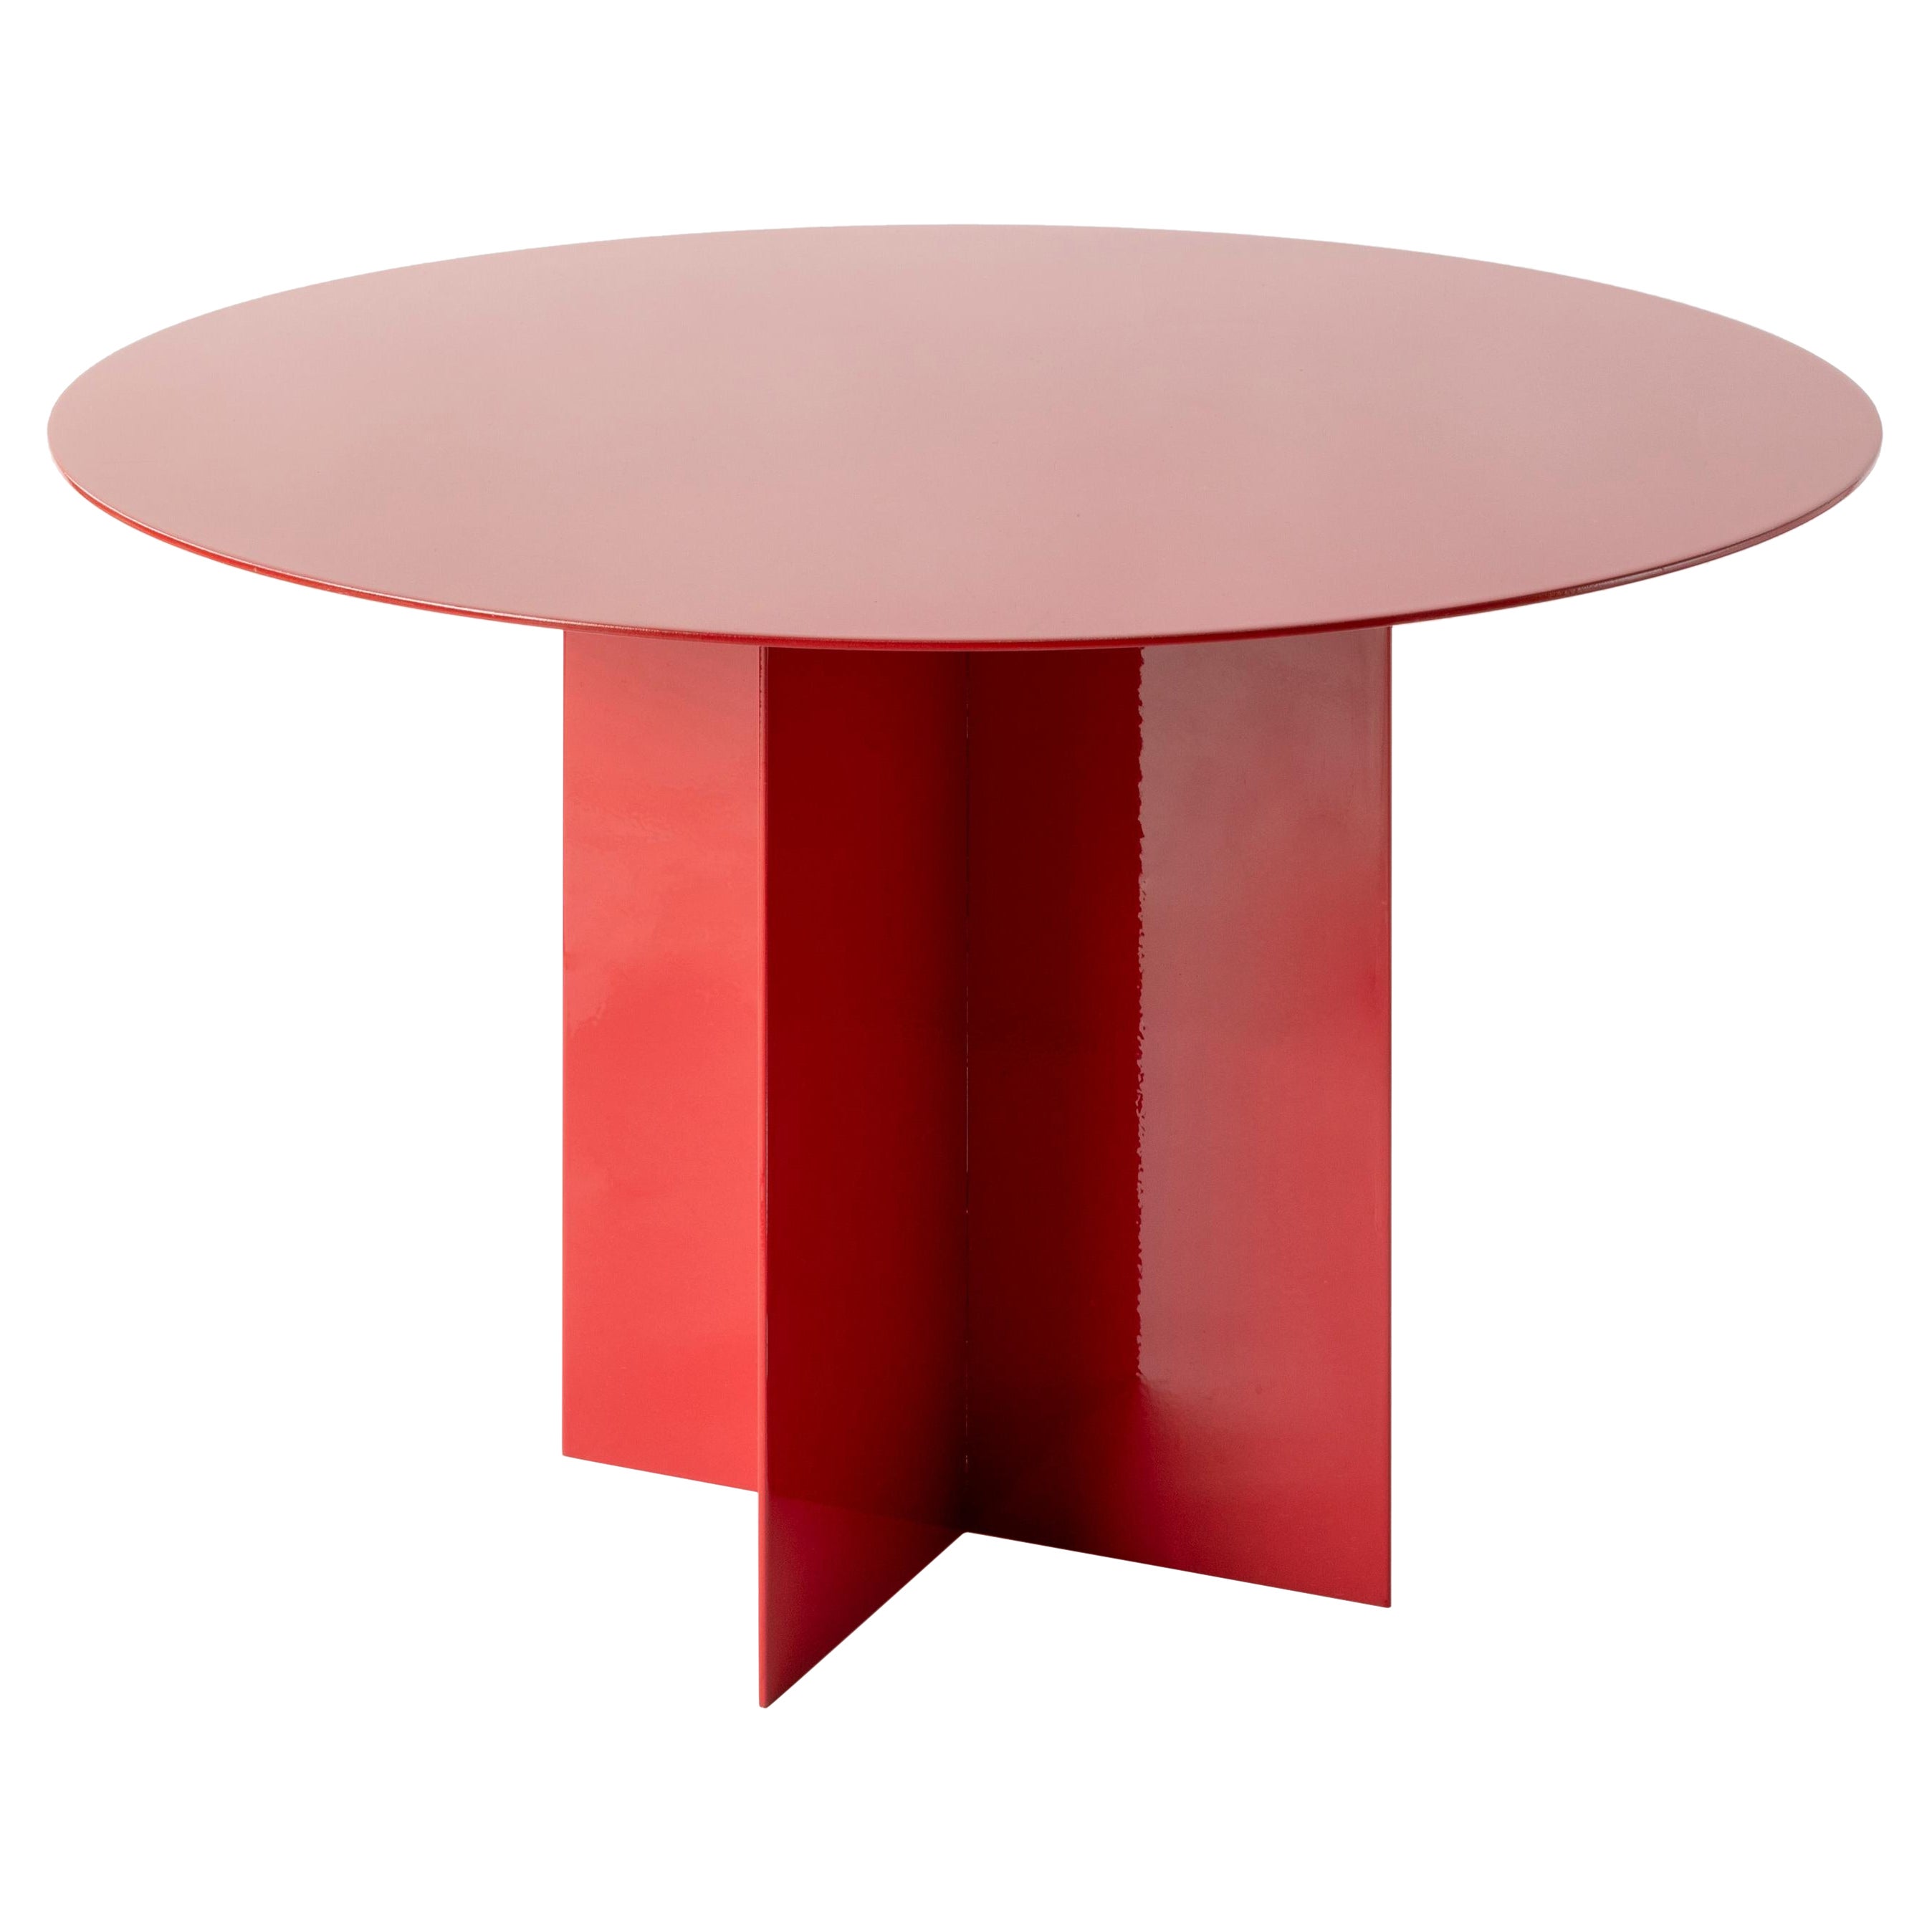 Across Large Round Red Coffee Table by Secondome Edizioni en vente